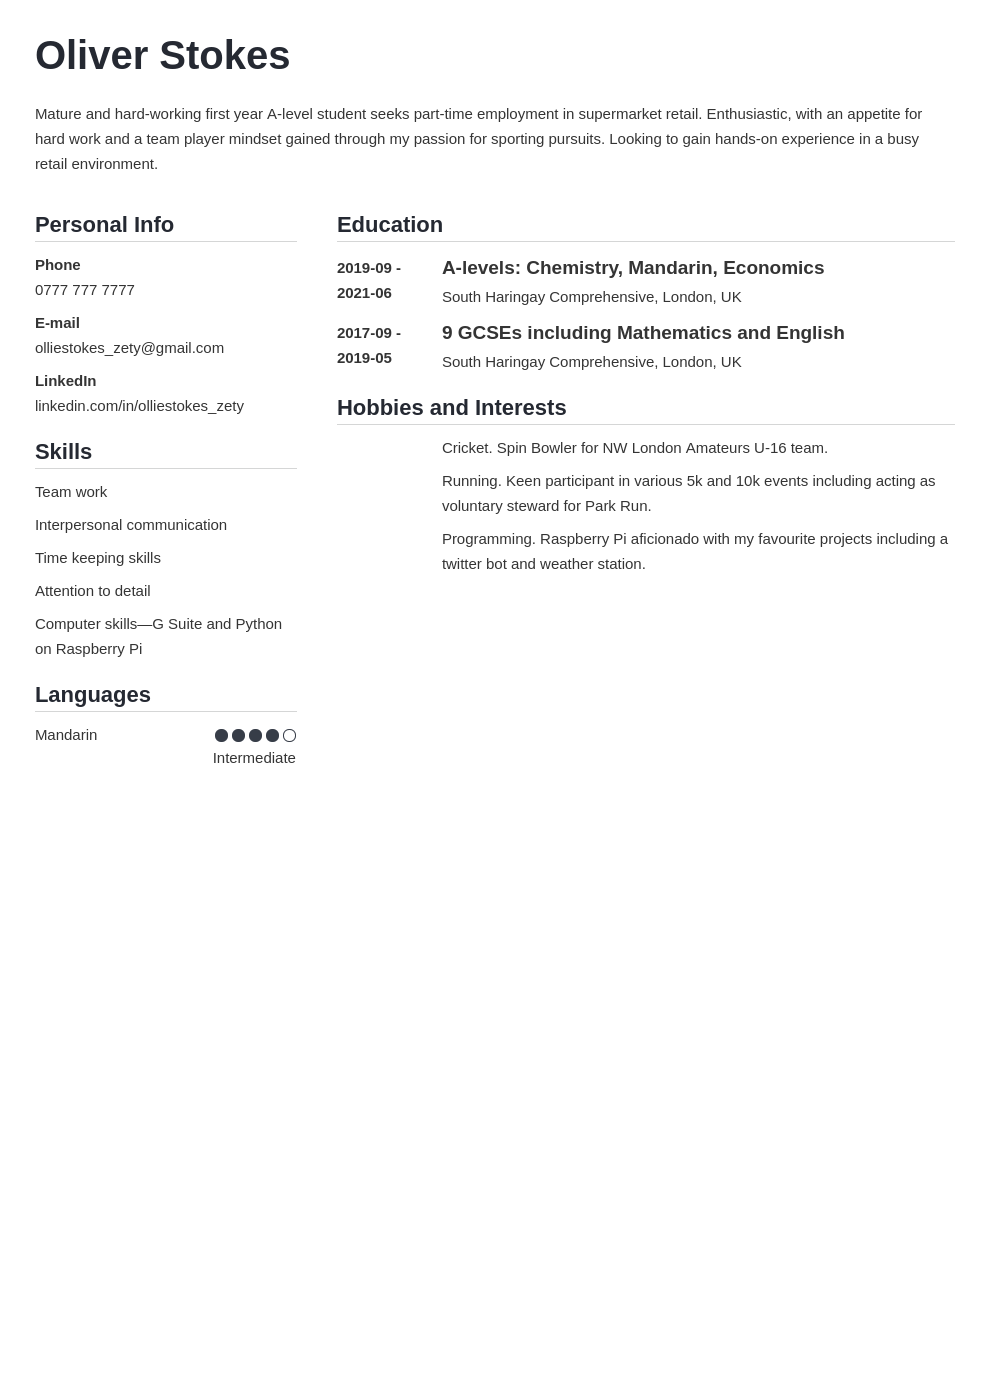 How to Write a CV for a 16-Year-Old [Template for First CV]